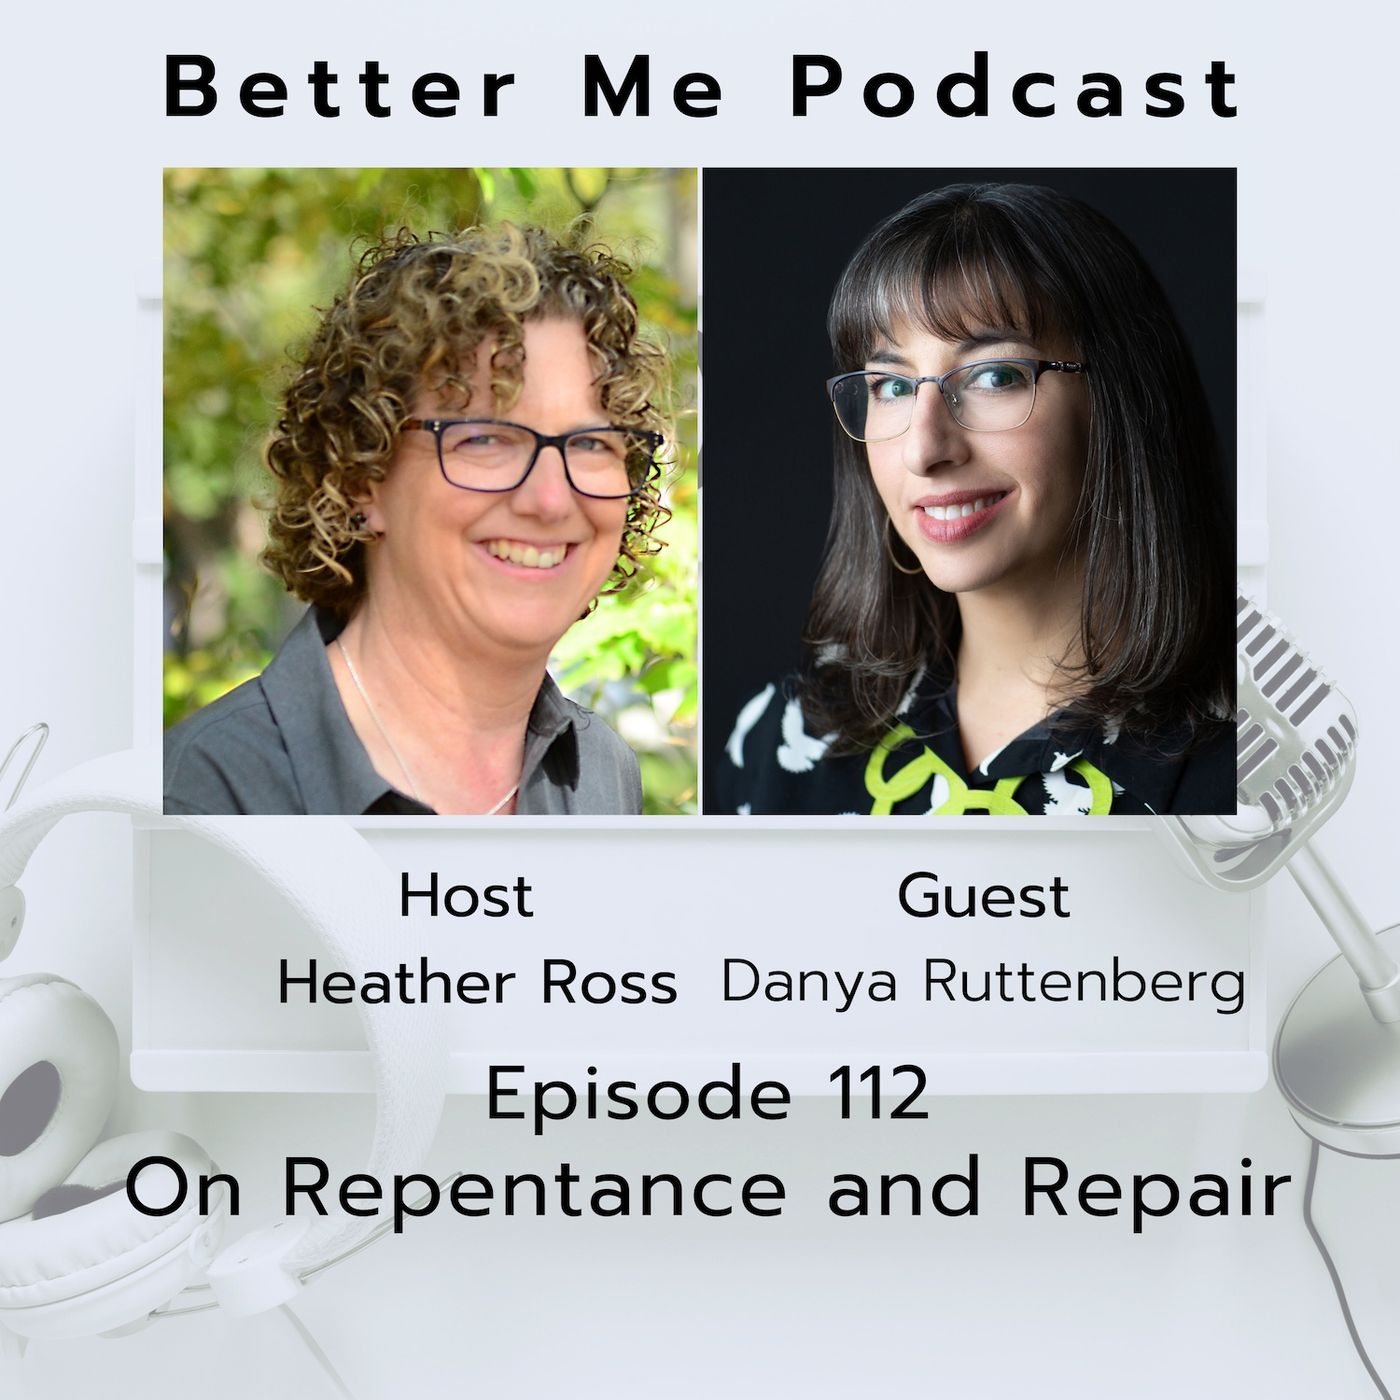 EP 112 - On Repentance and Repair (with guest Danya Ruttenberg)